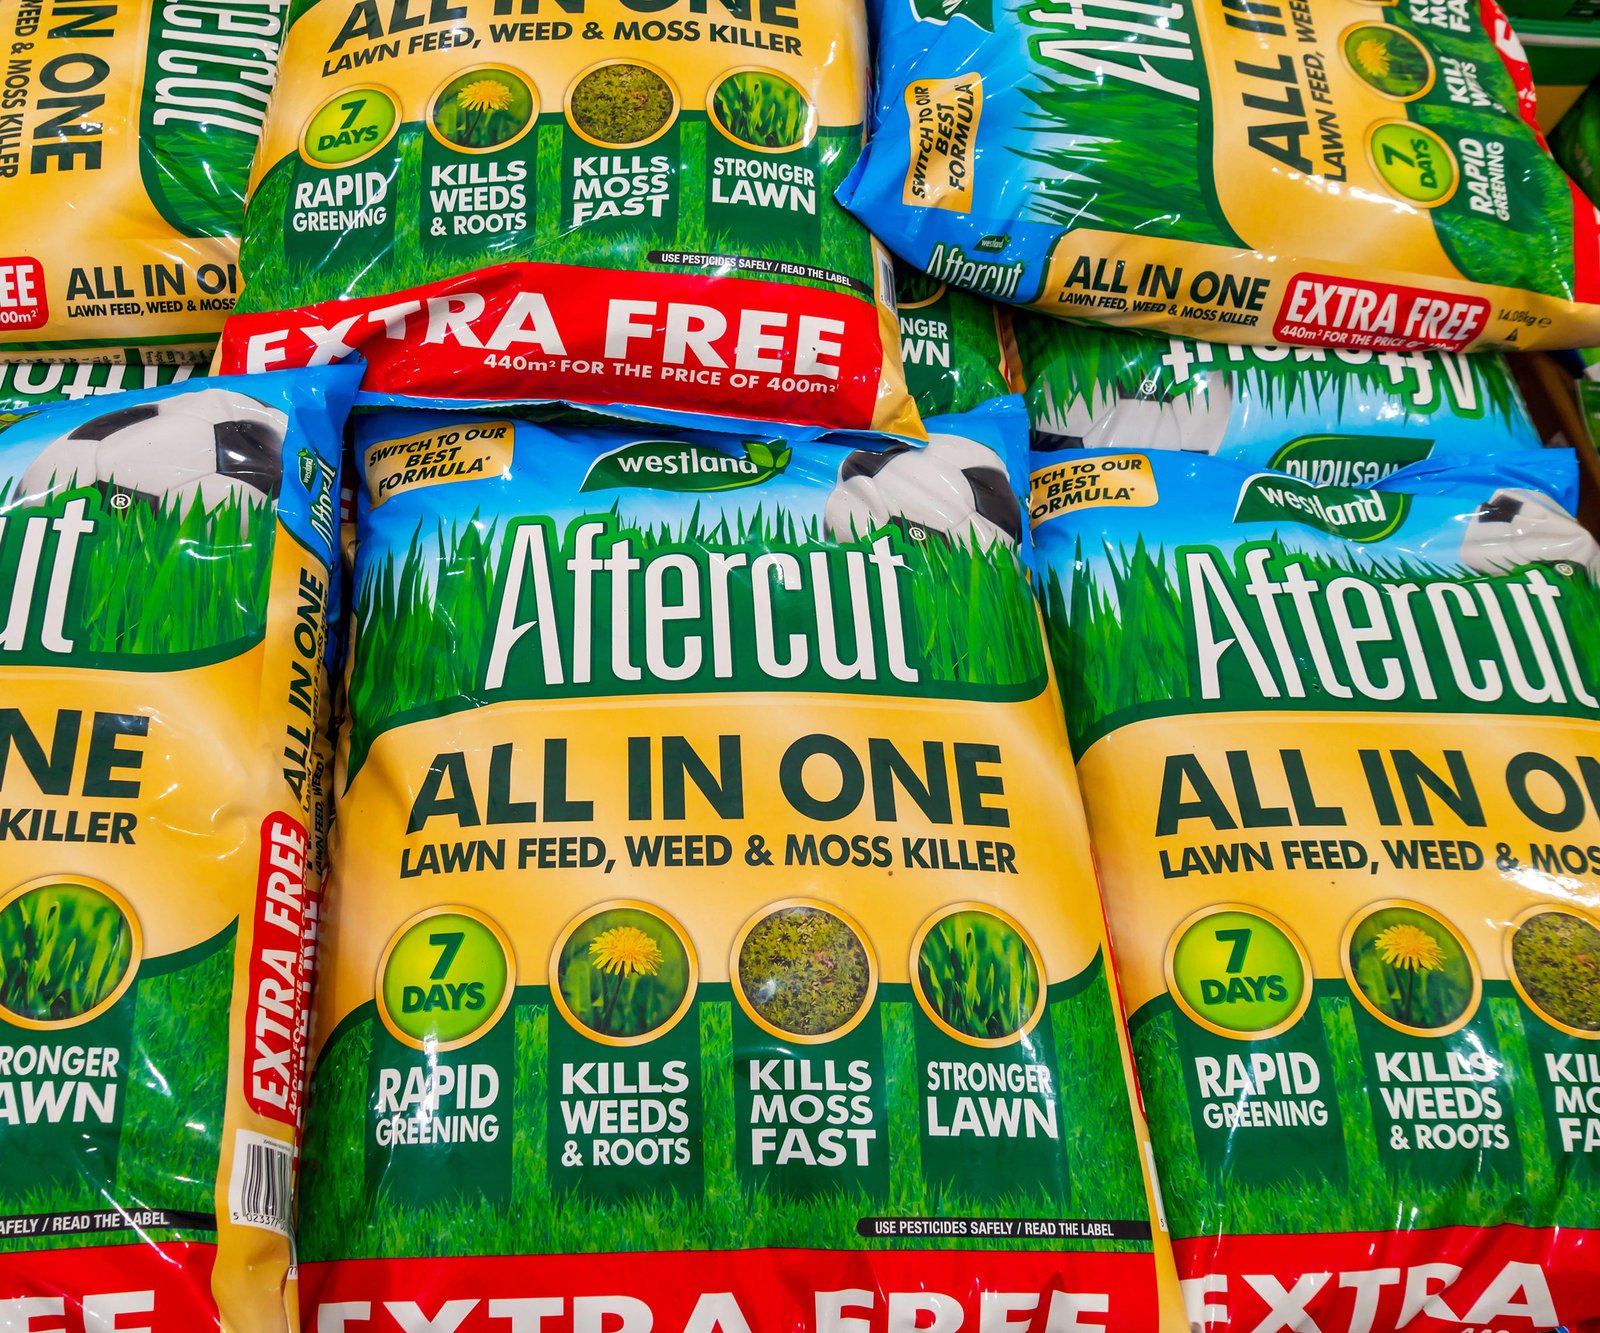 A stack of bags of Aftercut lawn feed weed and moss killer for sale in a garden centre